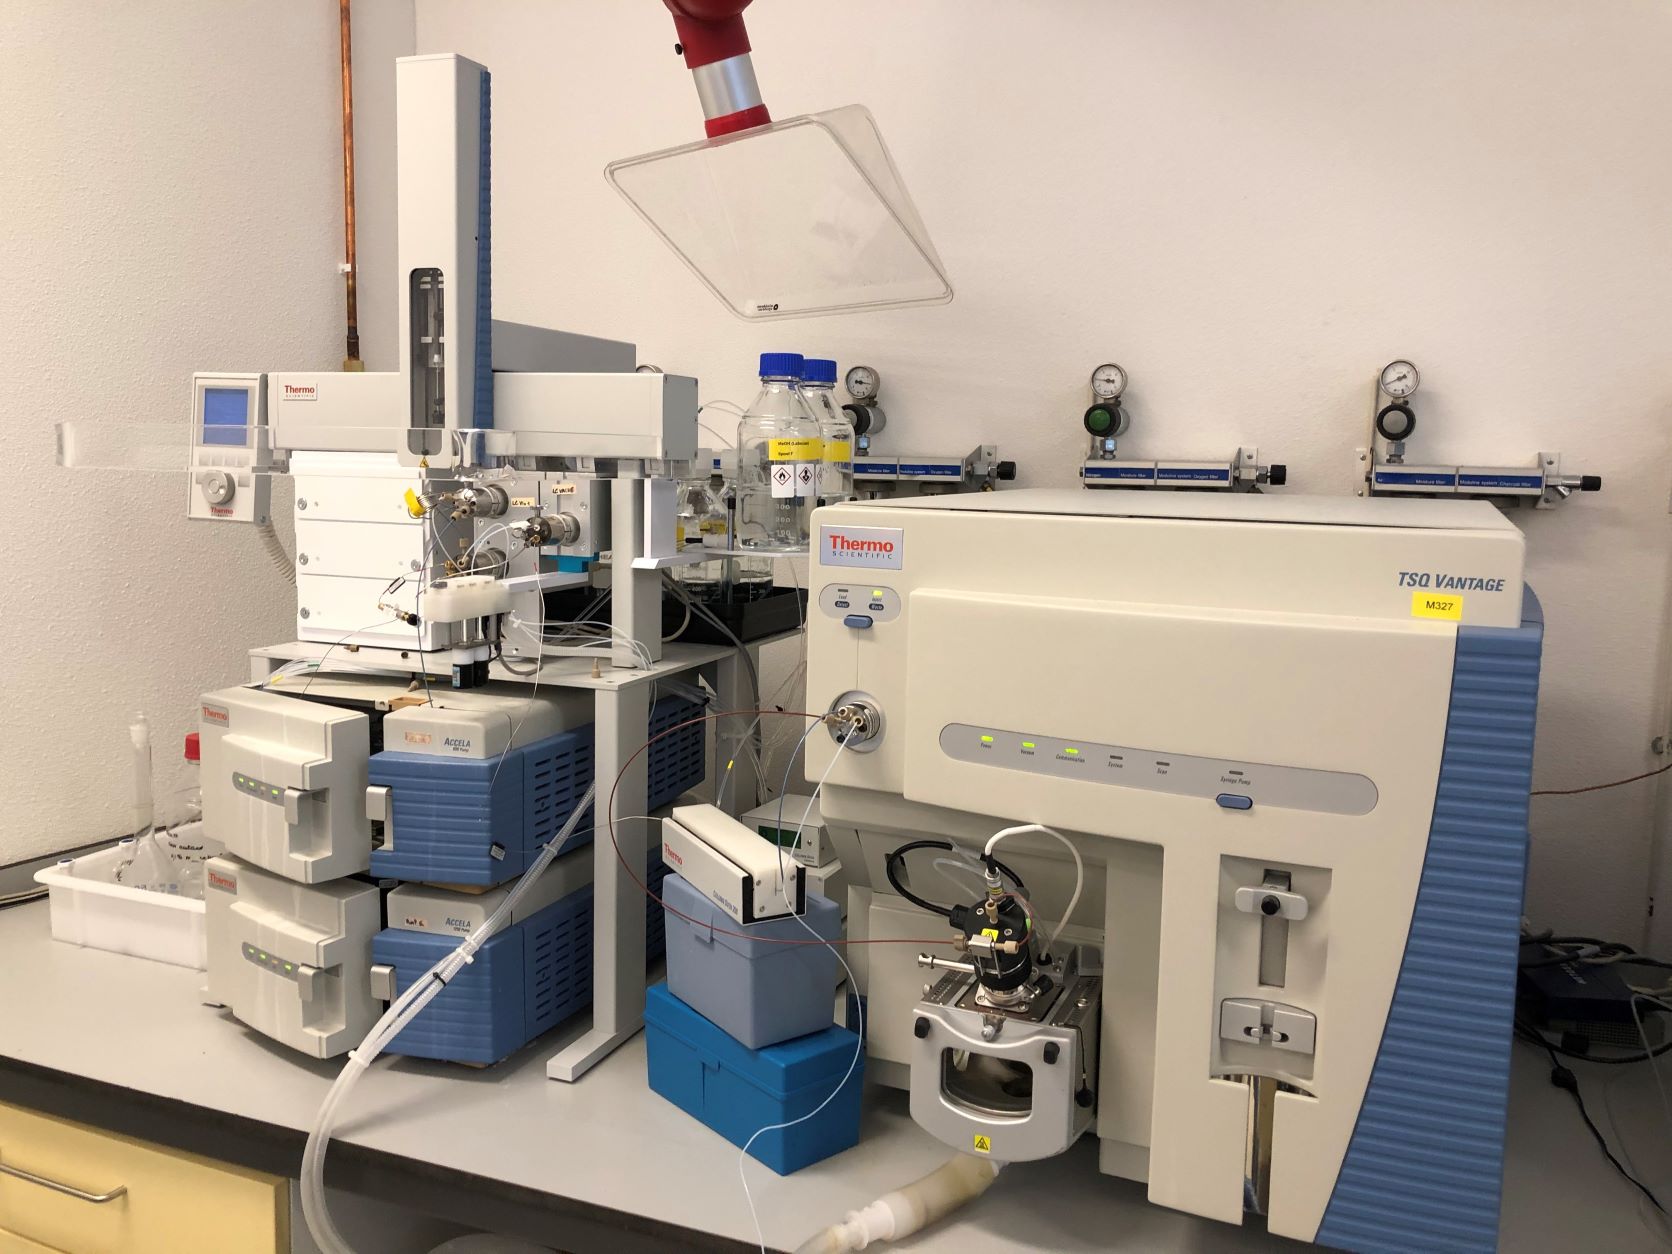 Nieuw in de voorraad: Thermo TSQ Vantage Triple Quad LCMS met Thermo Accela UHPLC